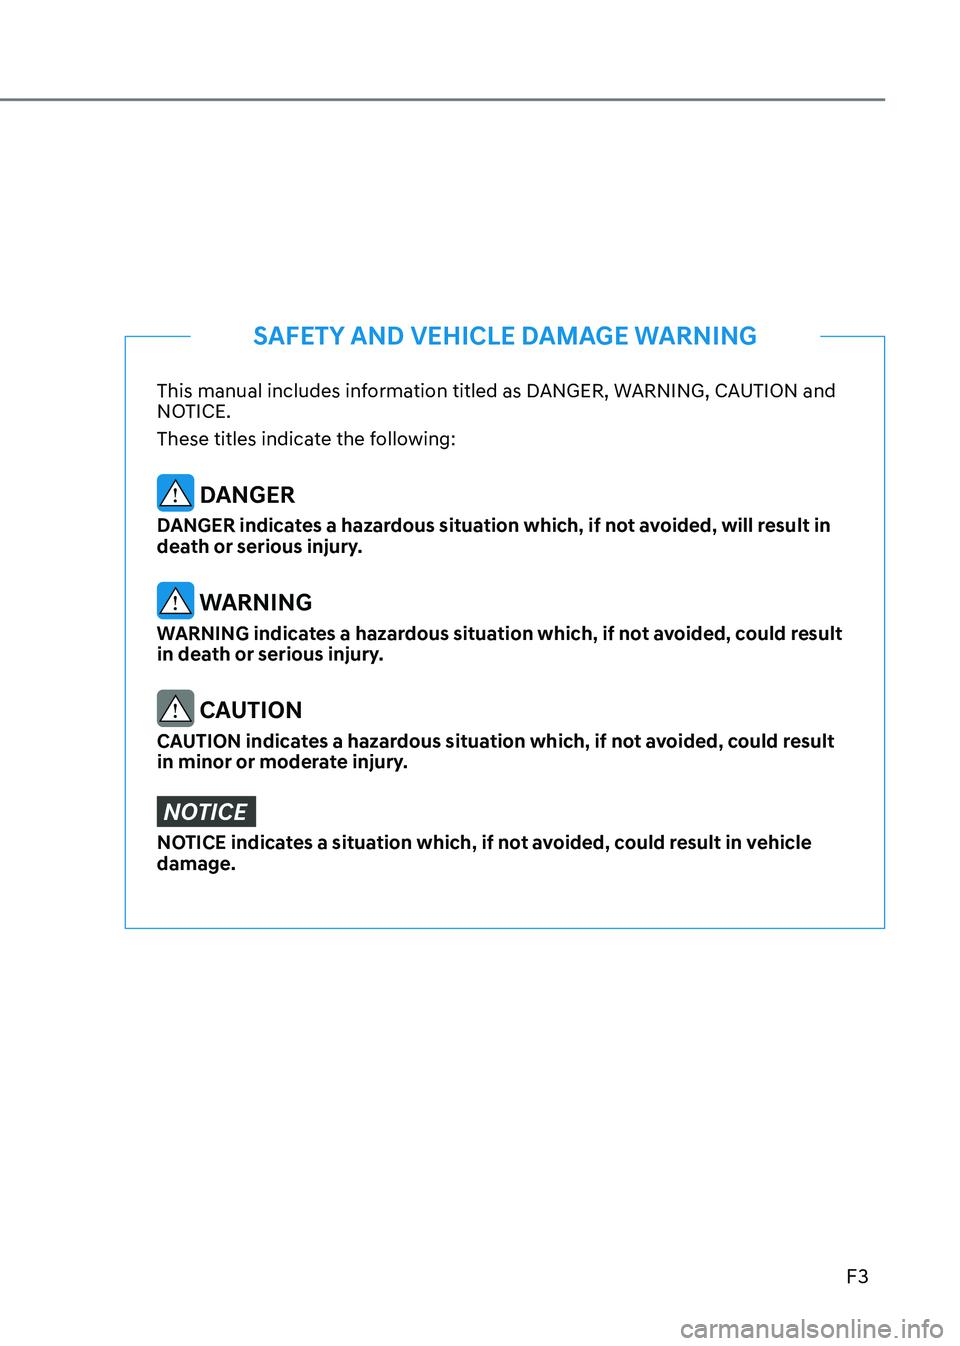 GENESIS GV80 2021  Owners Manual F3
This manual includes information titled as DANGER, WARNING, CAUTION and 
NOTICE.
These titles indicate the following:
 DANGER
DANGER indicates a hazardous situation which, if not avoided, will resu